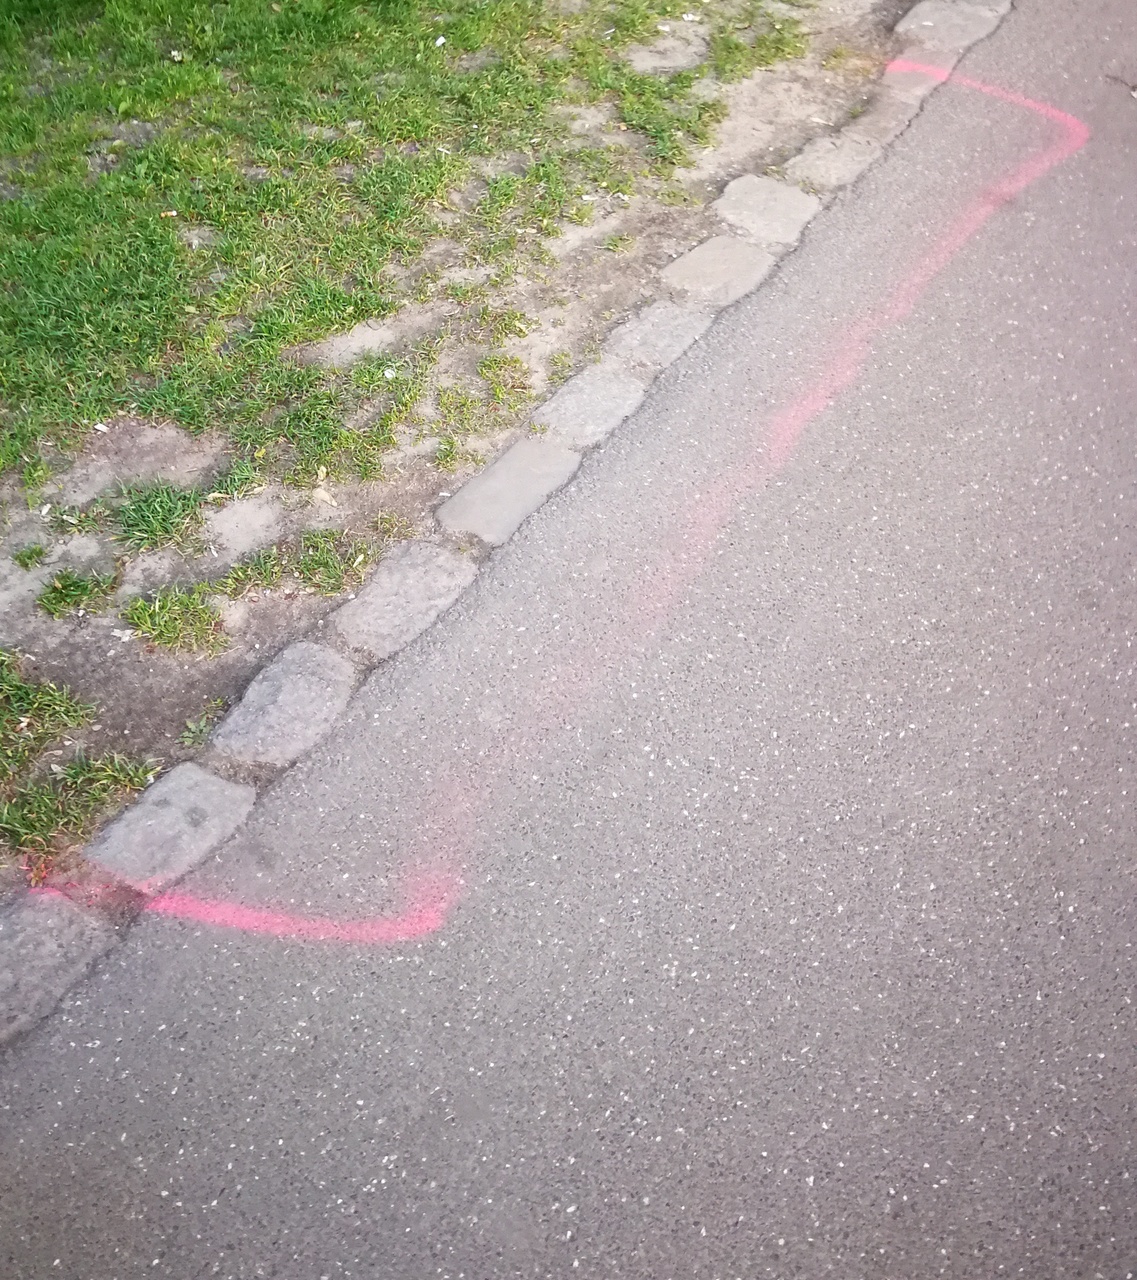 The politics of pink spray on a pathway (Story)